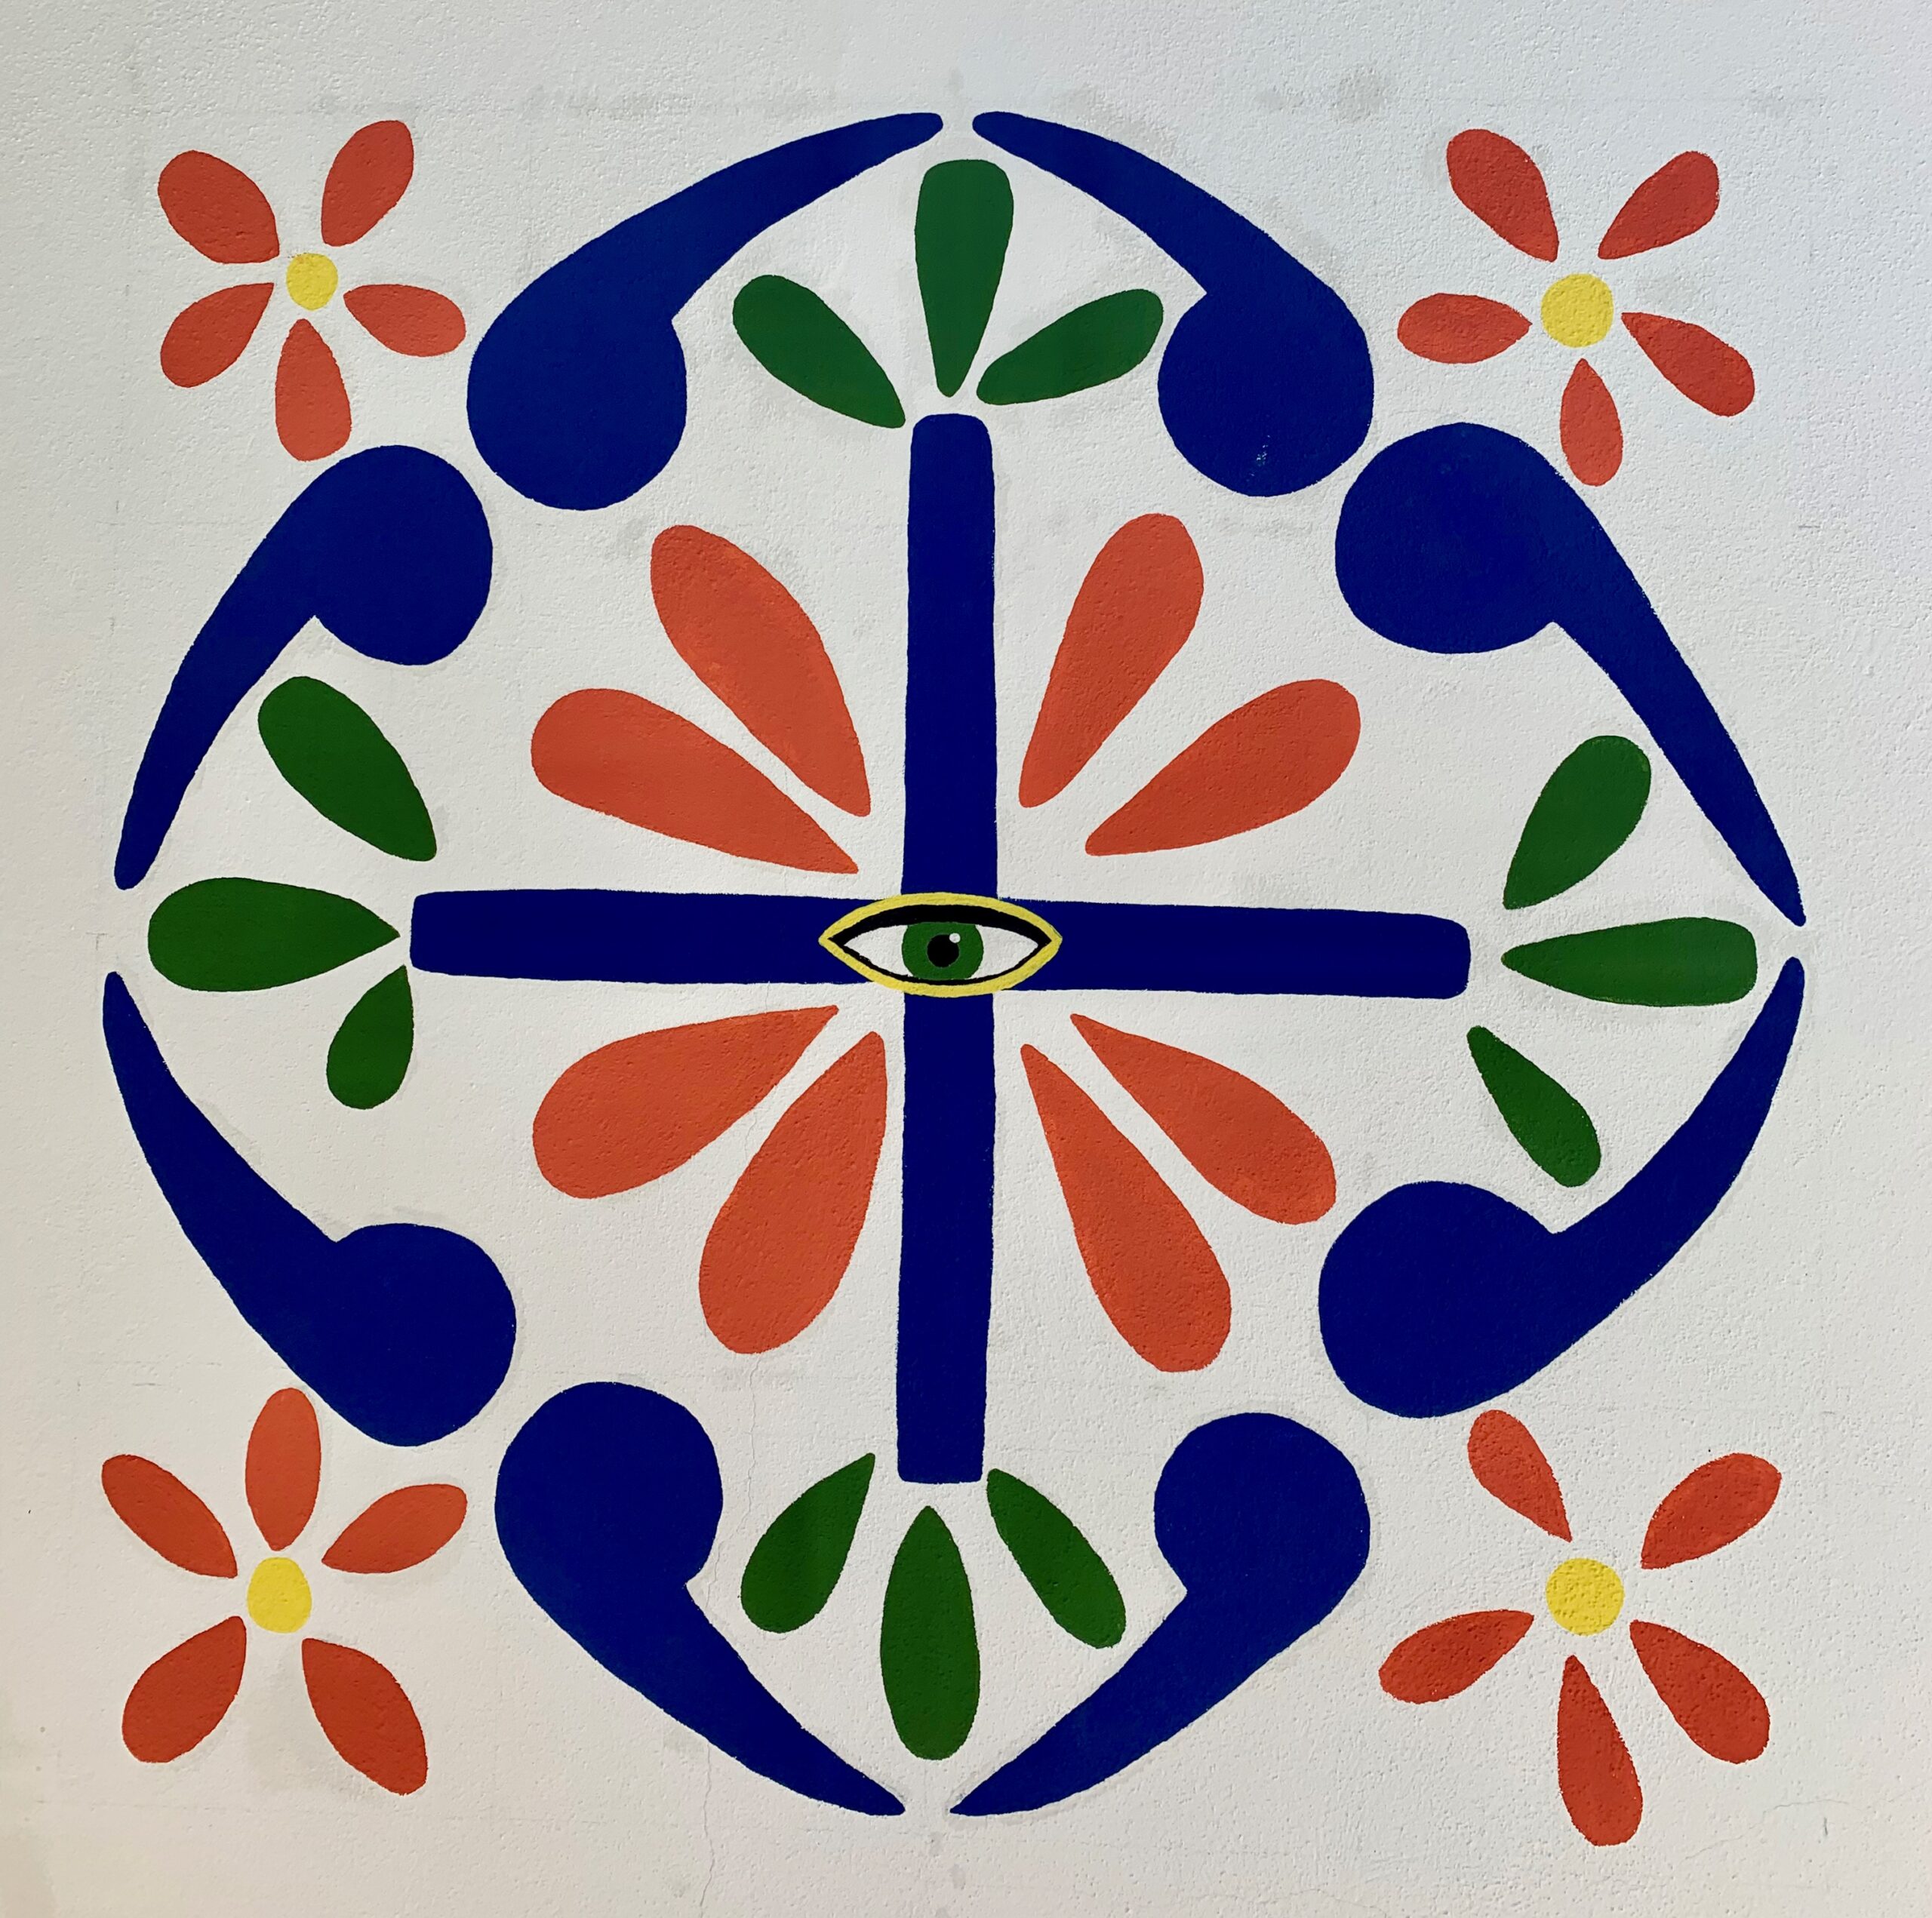 Image shows Mandela-type painting with flower, teardrop, and eye motif